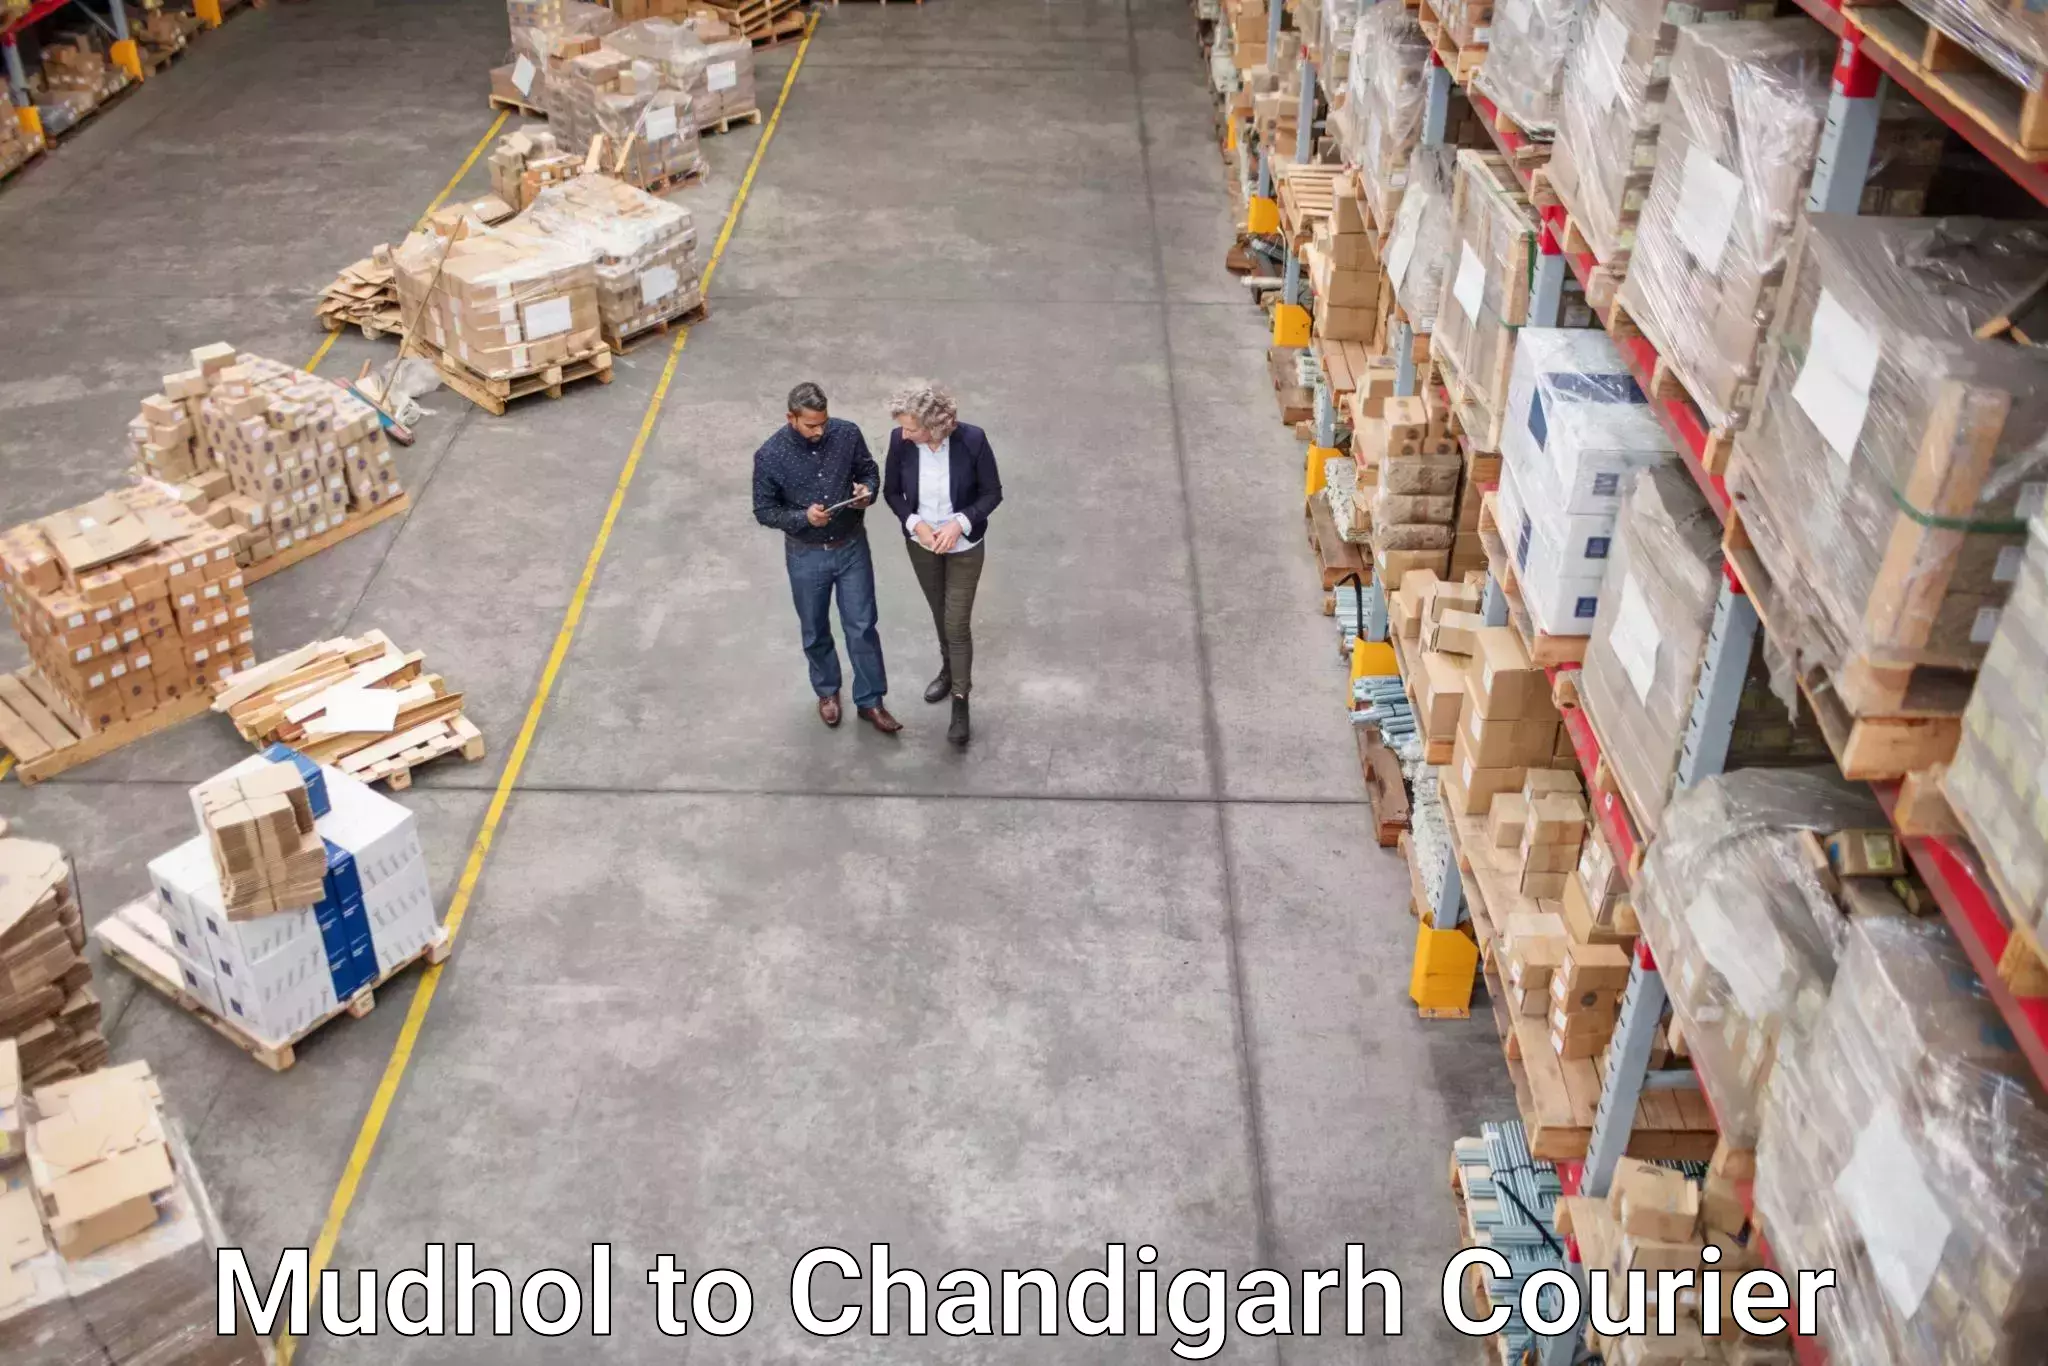 24-hour courier service Mudhol to Chandigarh